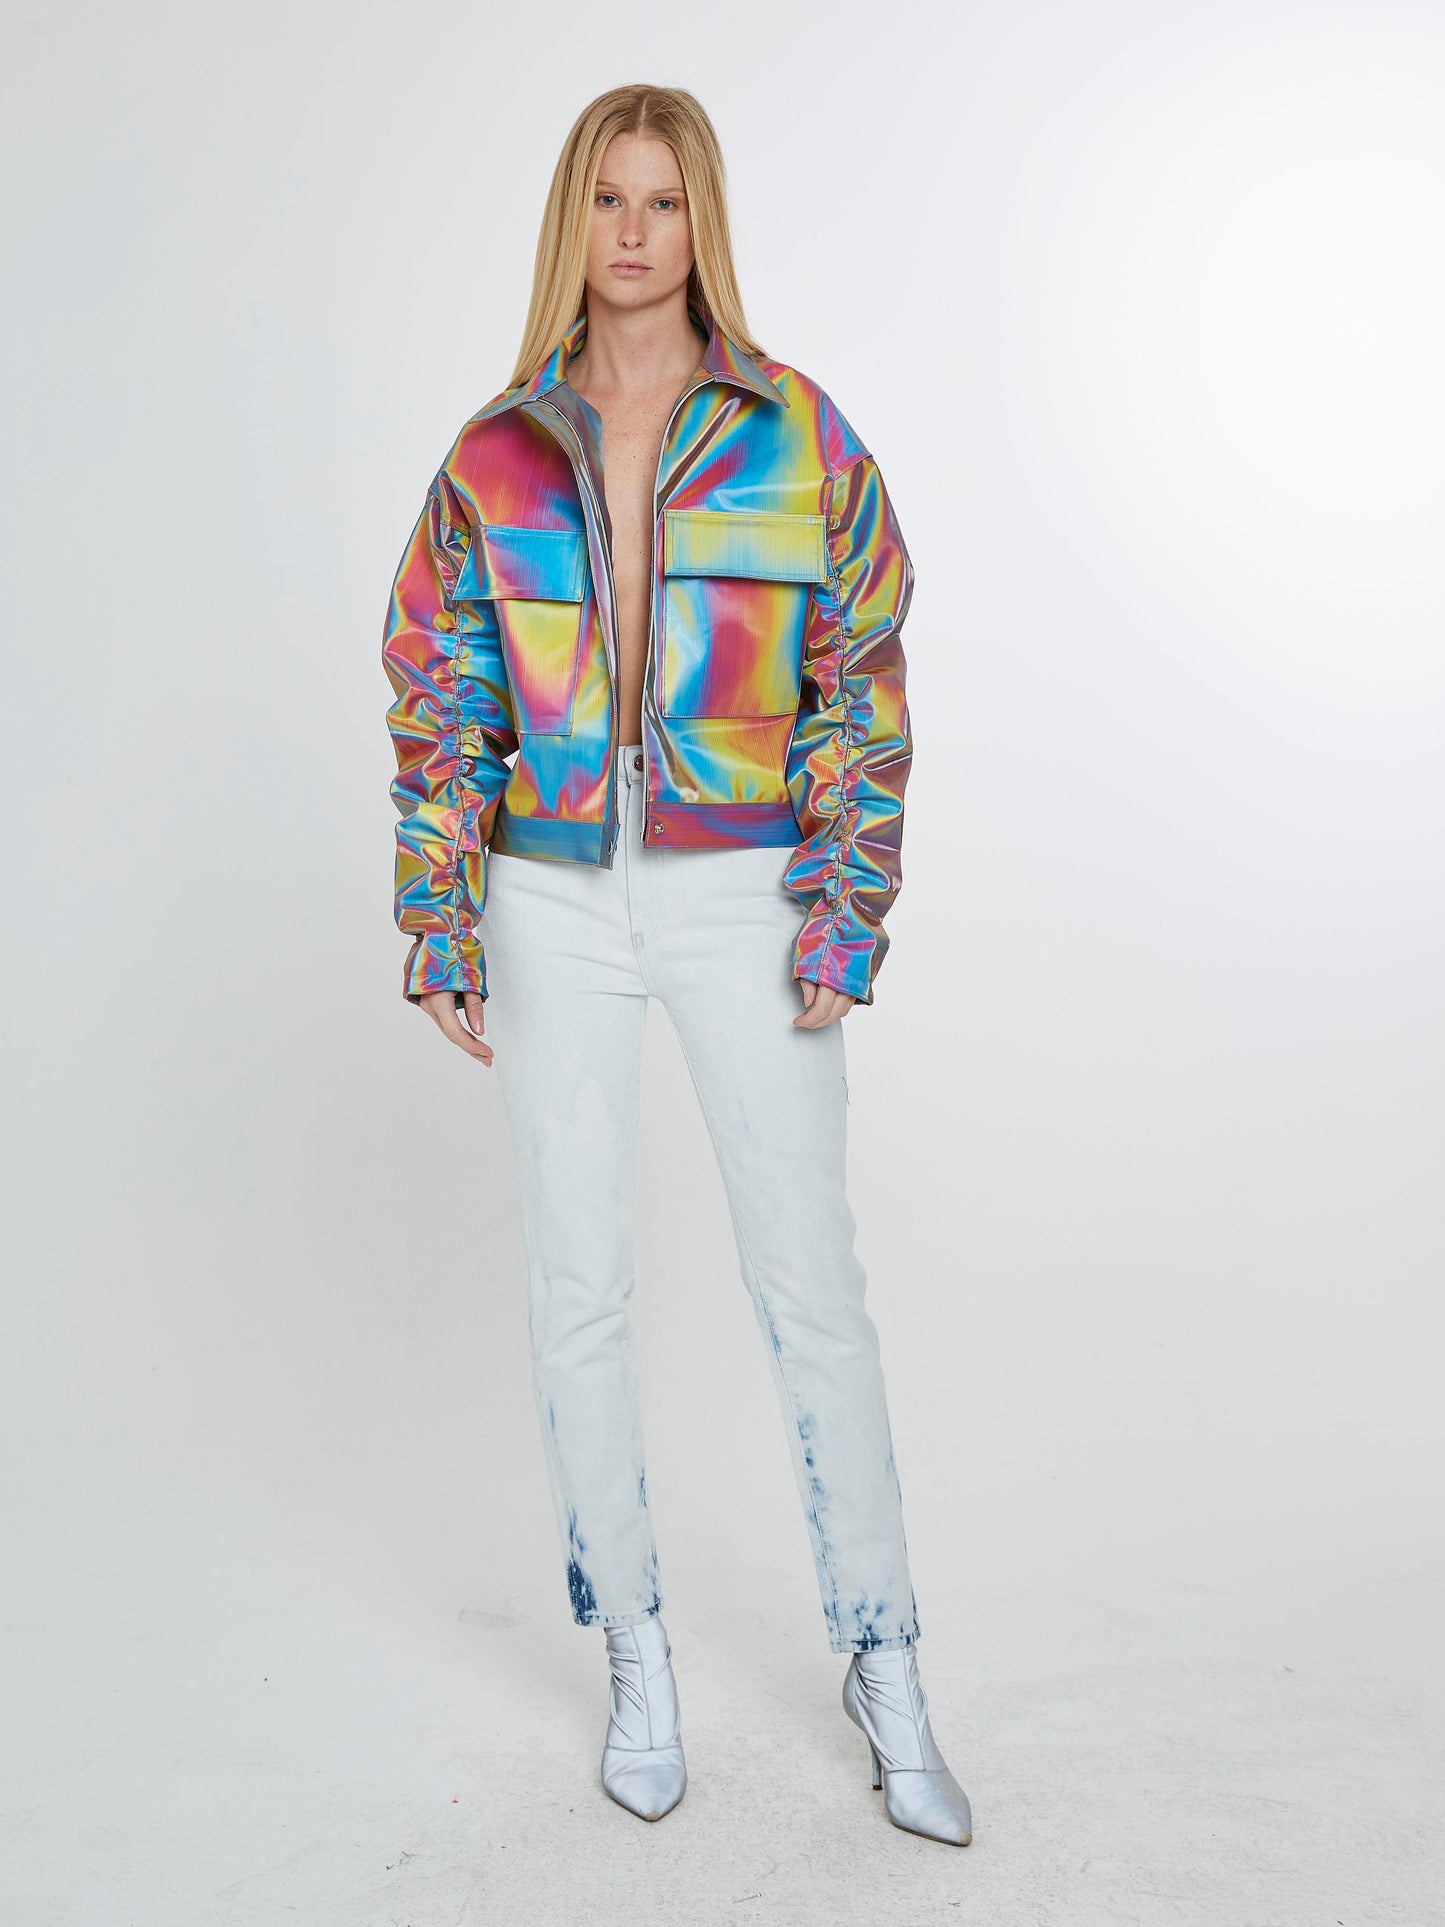 Rainbow jacket with rushed sleeves